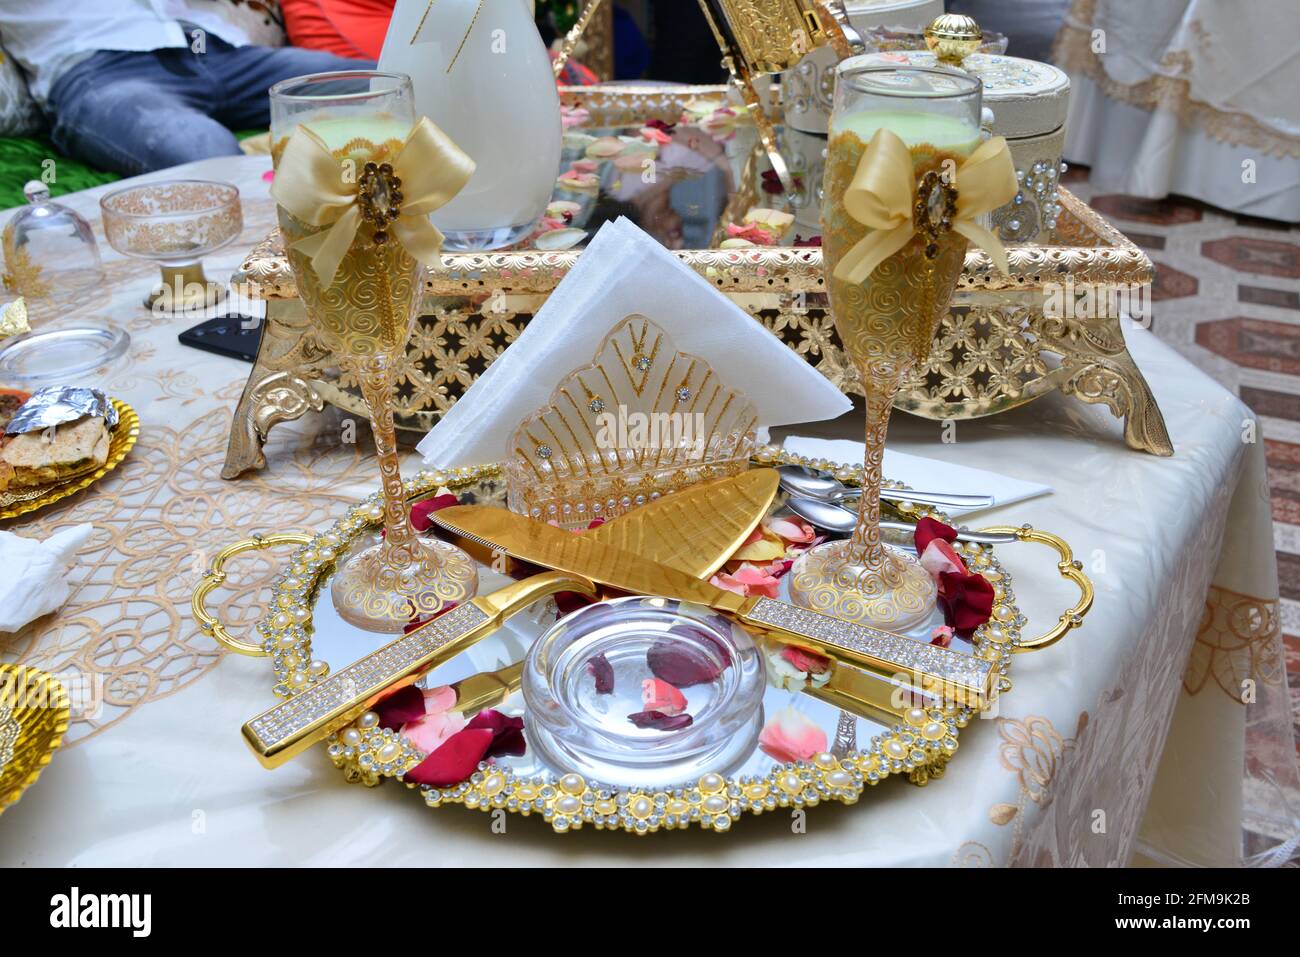 Moroccan wedding table. Milk cups to be served to the bride and groom. Arab wedding traditions Stock Photo